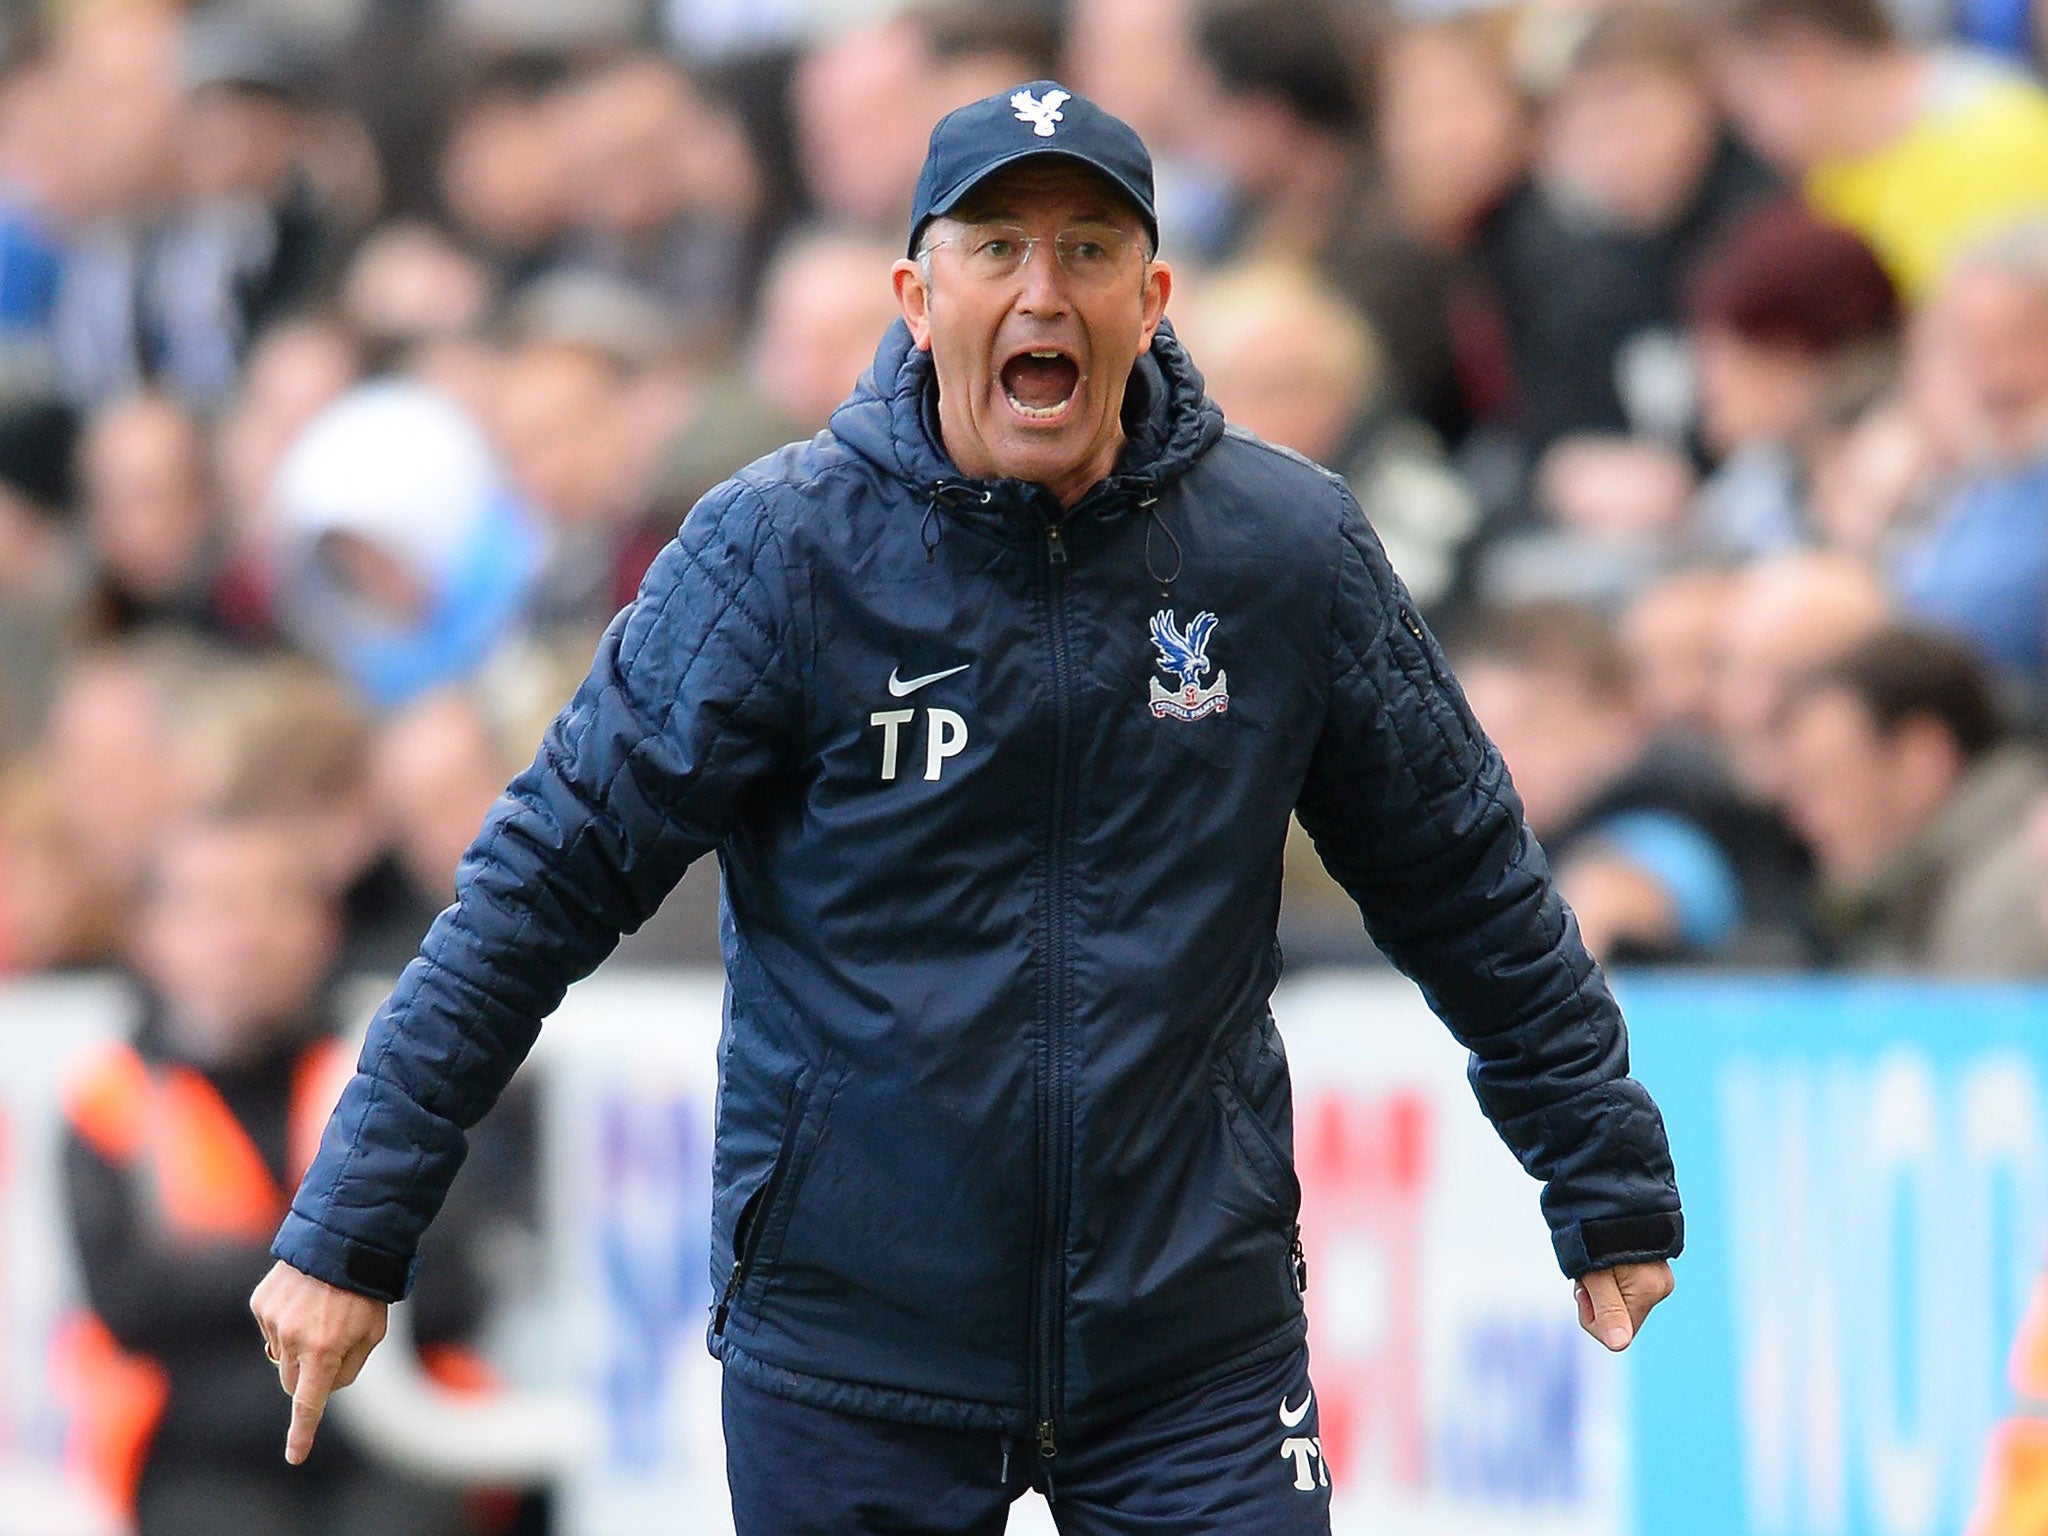 Tony Pulis is unhappy about Crystal Palace’s lack of signings